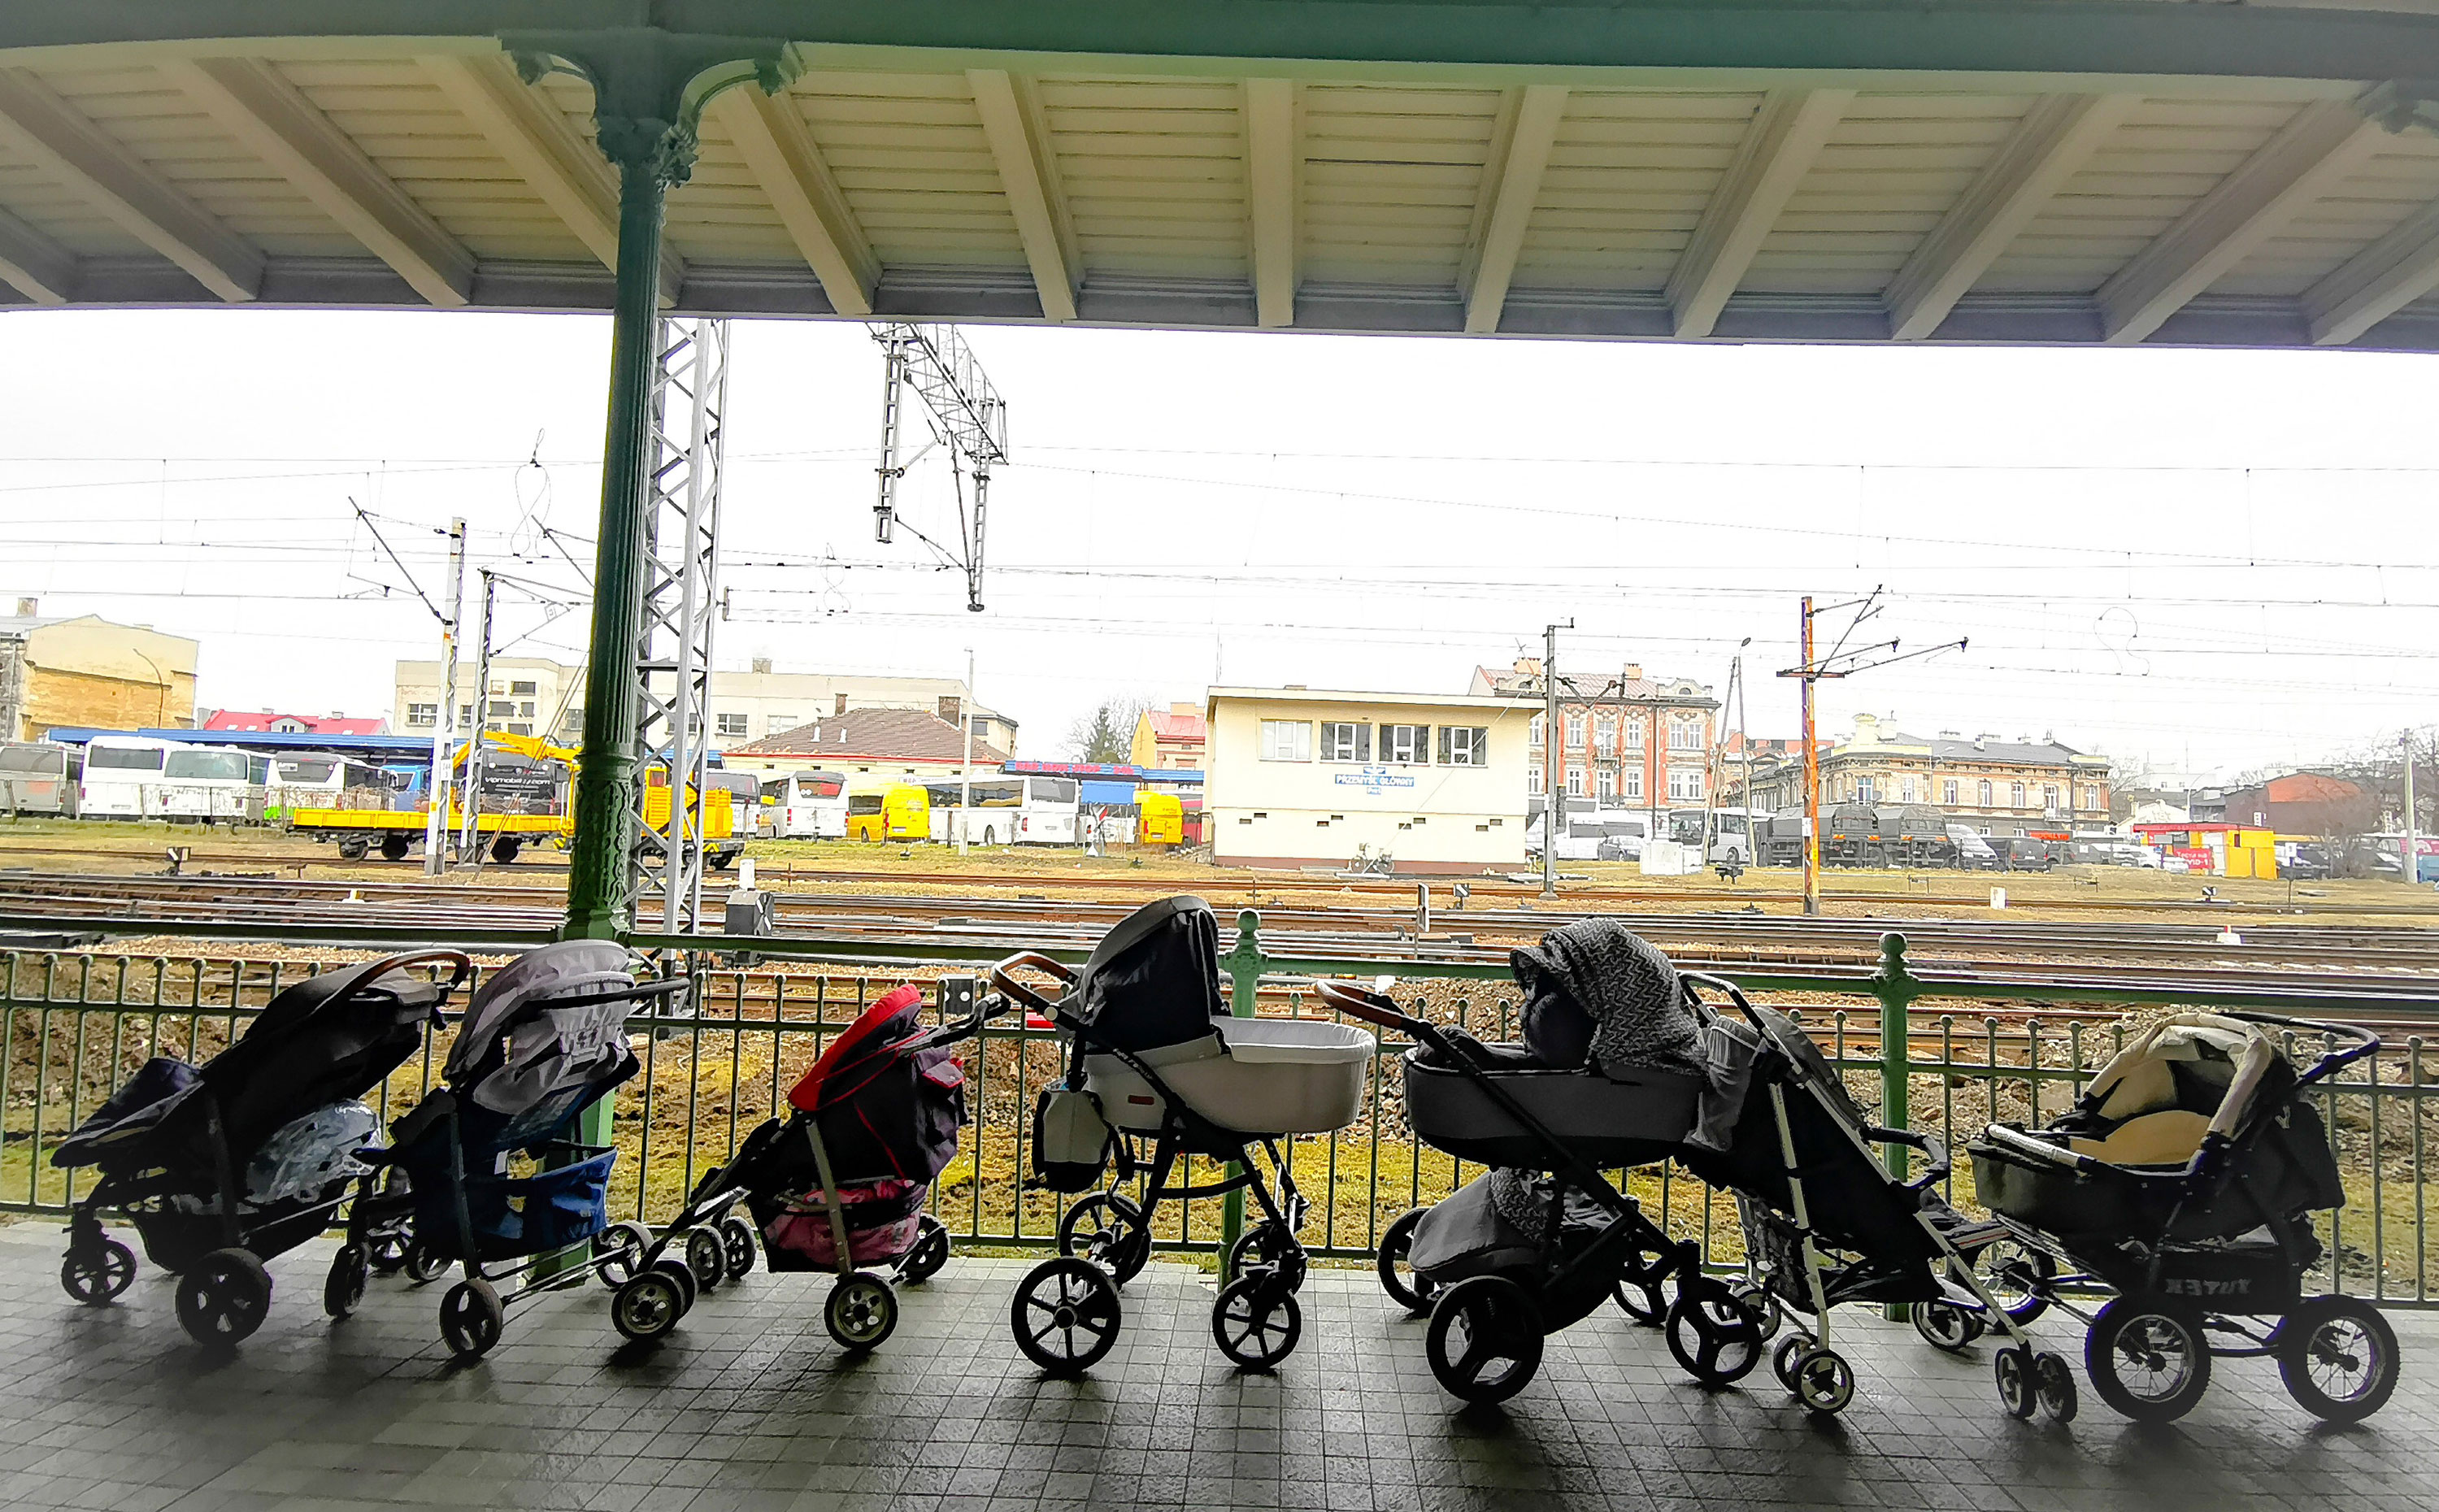 Strollers for refugees and their babies fleeing the conflict from neighboring Ukraine are left at a train station in Przemysl, Poland, on March 2.